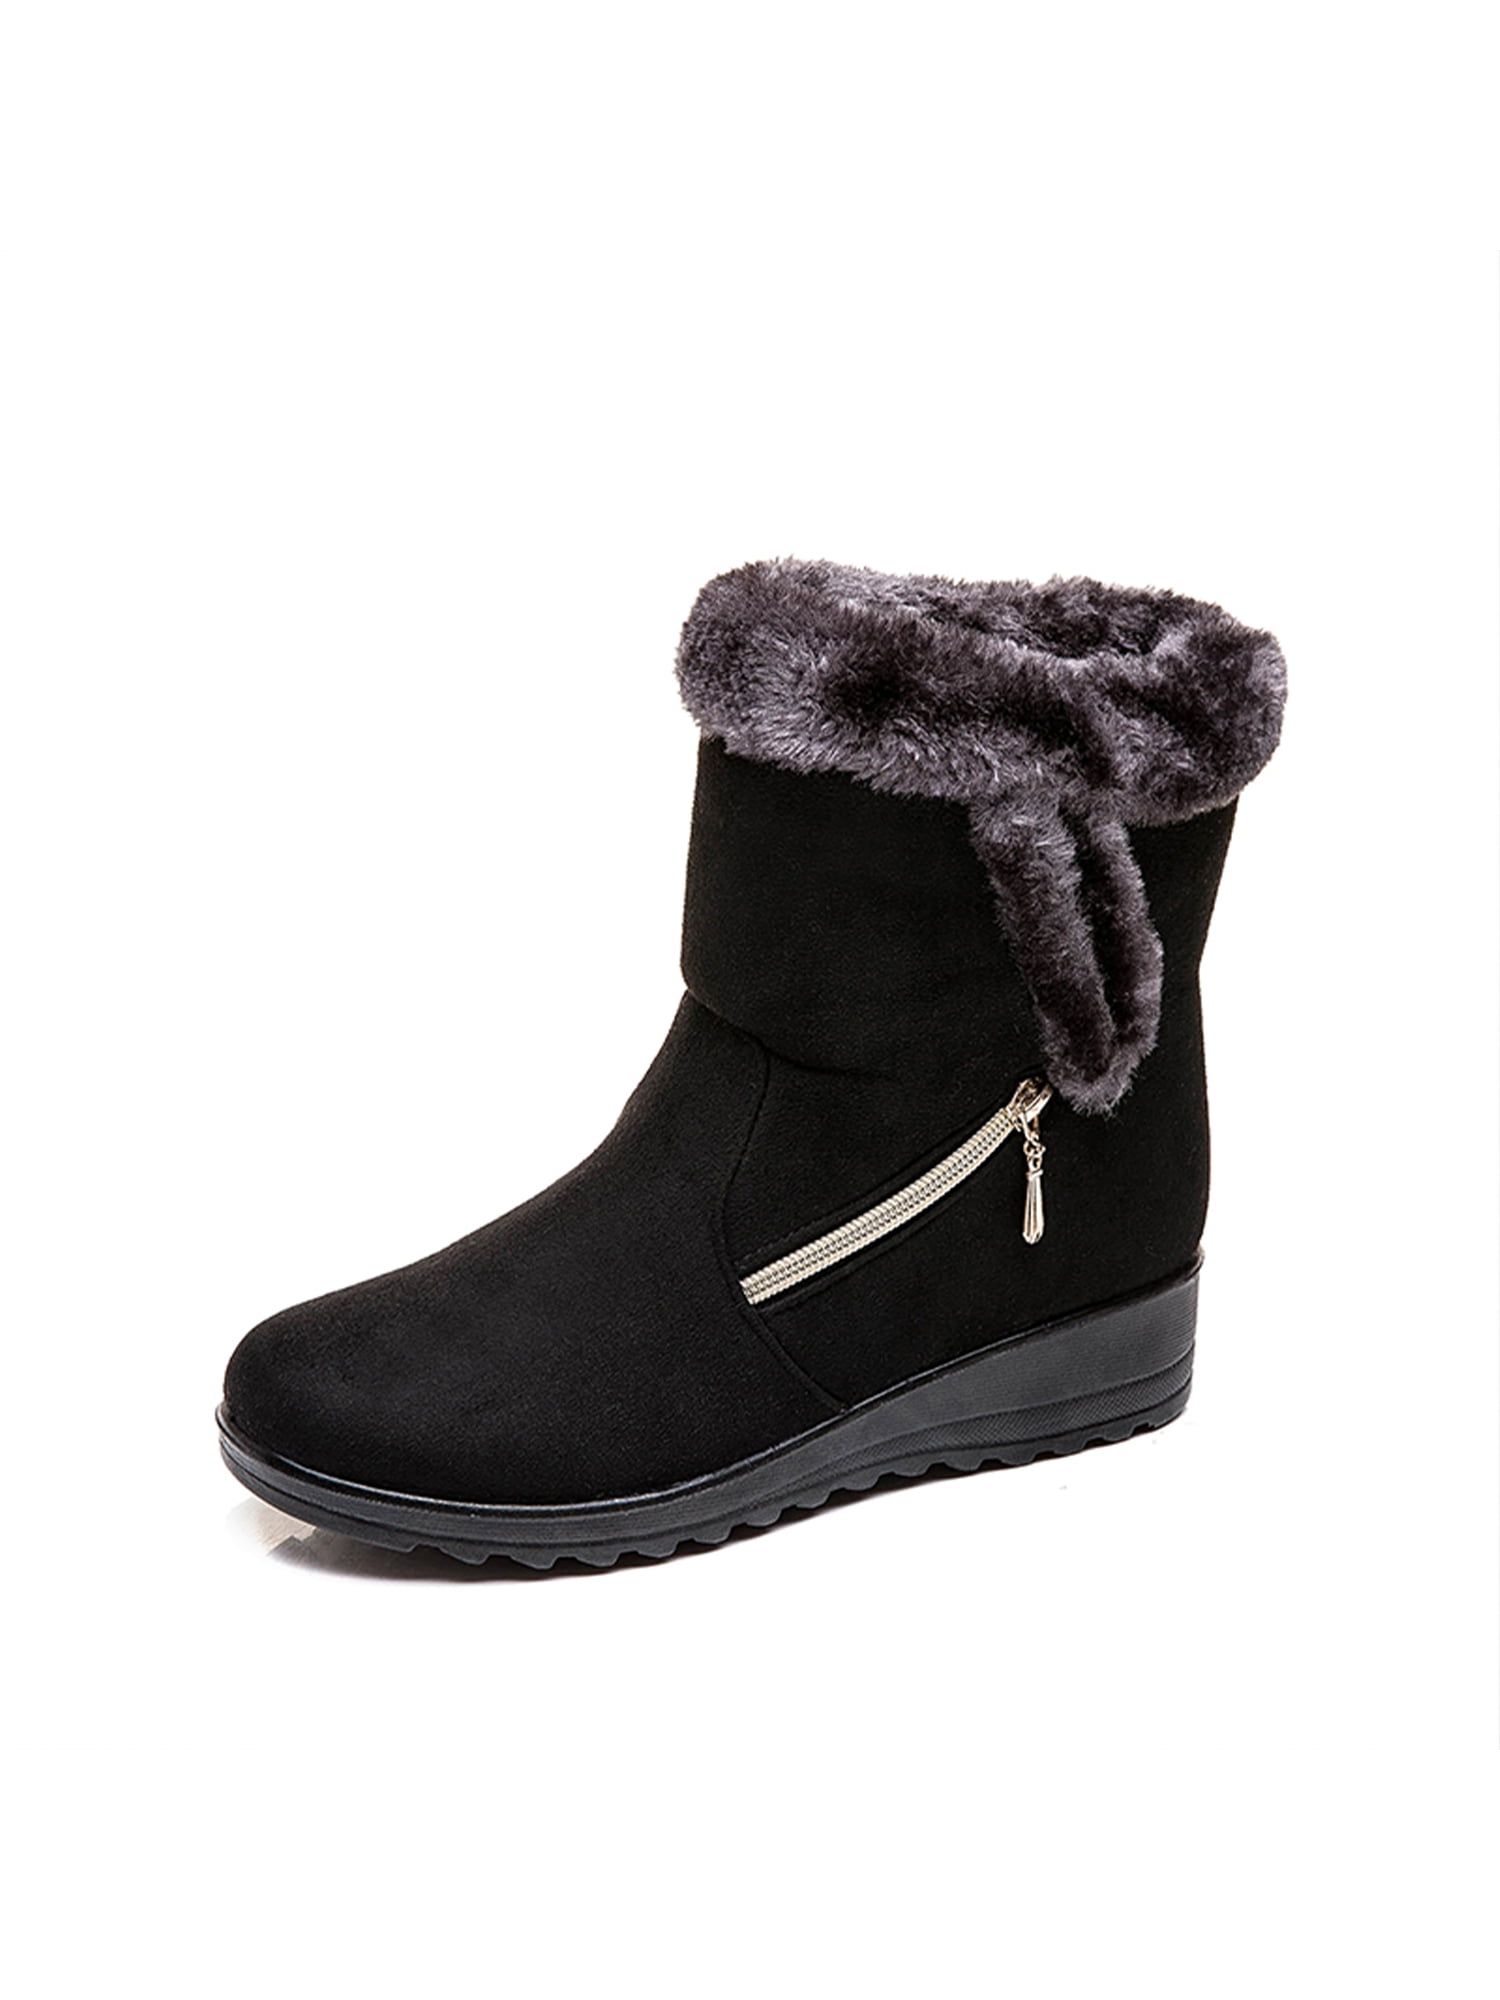 Details about   Womens Snow Ankle Boots Ladies Winter Fur Lined Windproof Sneakers Shoes Size 